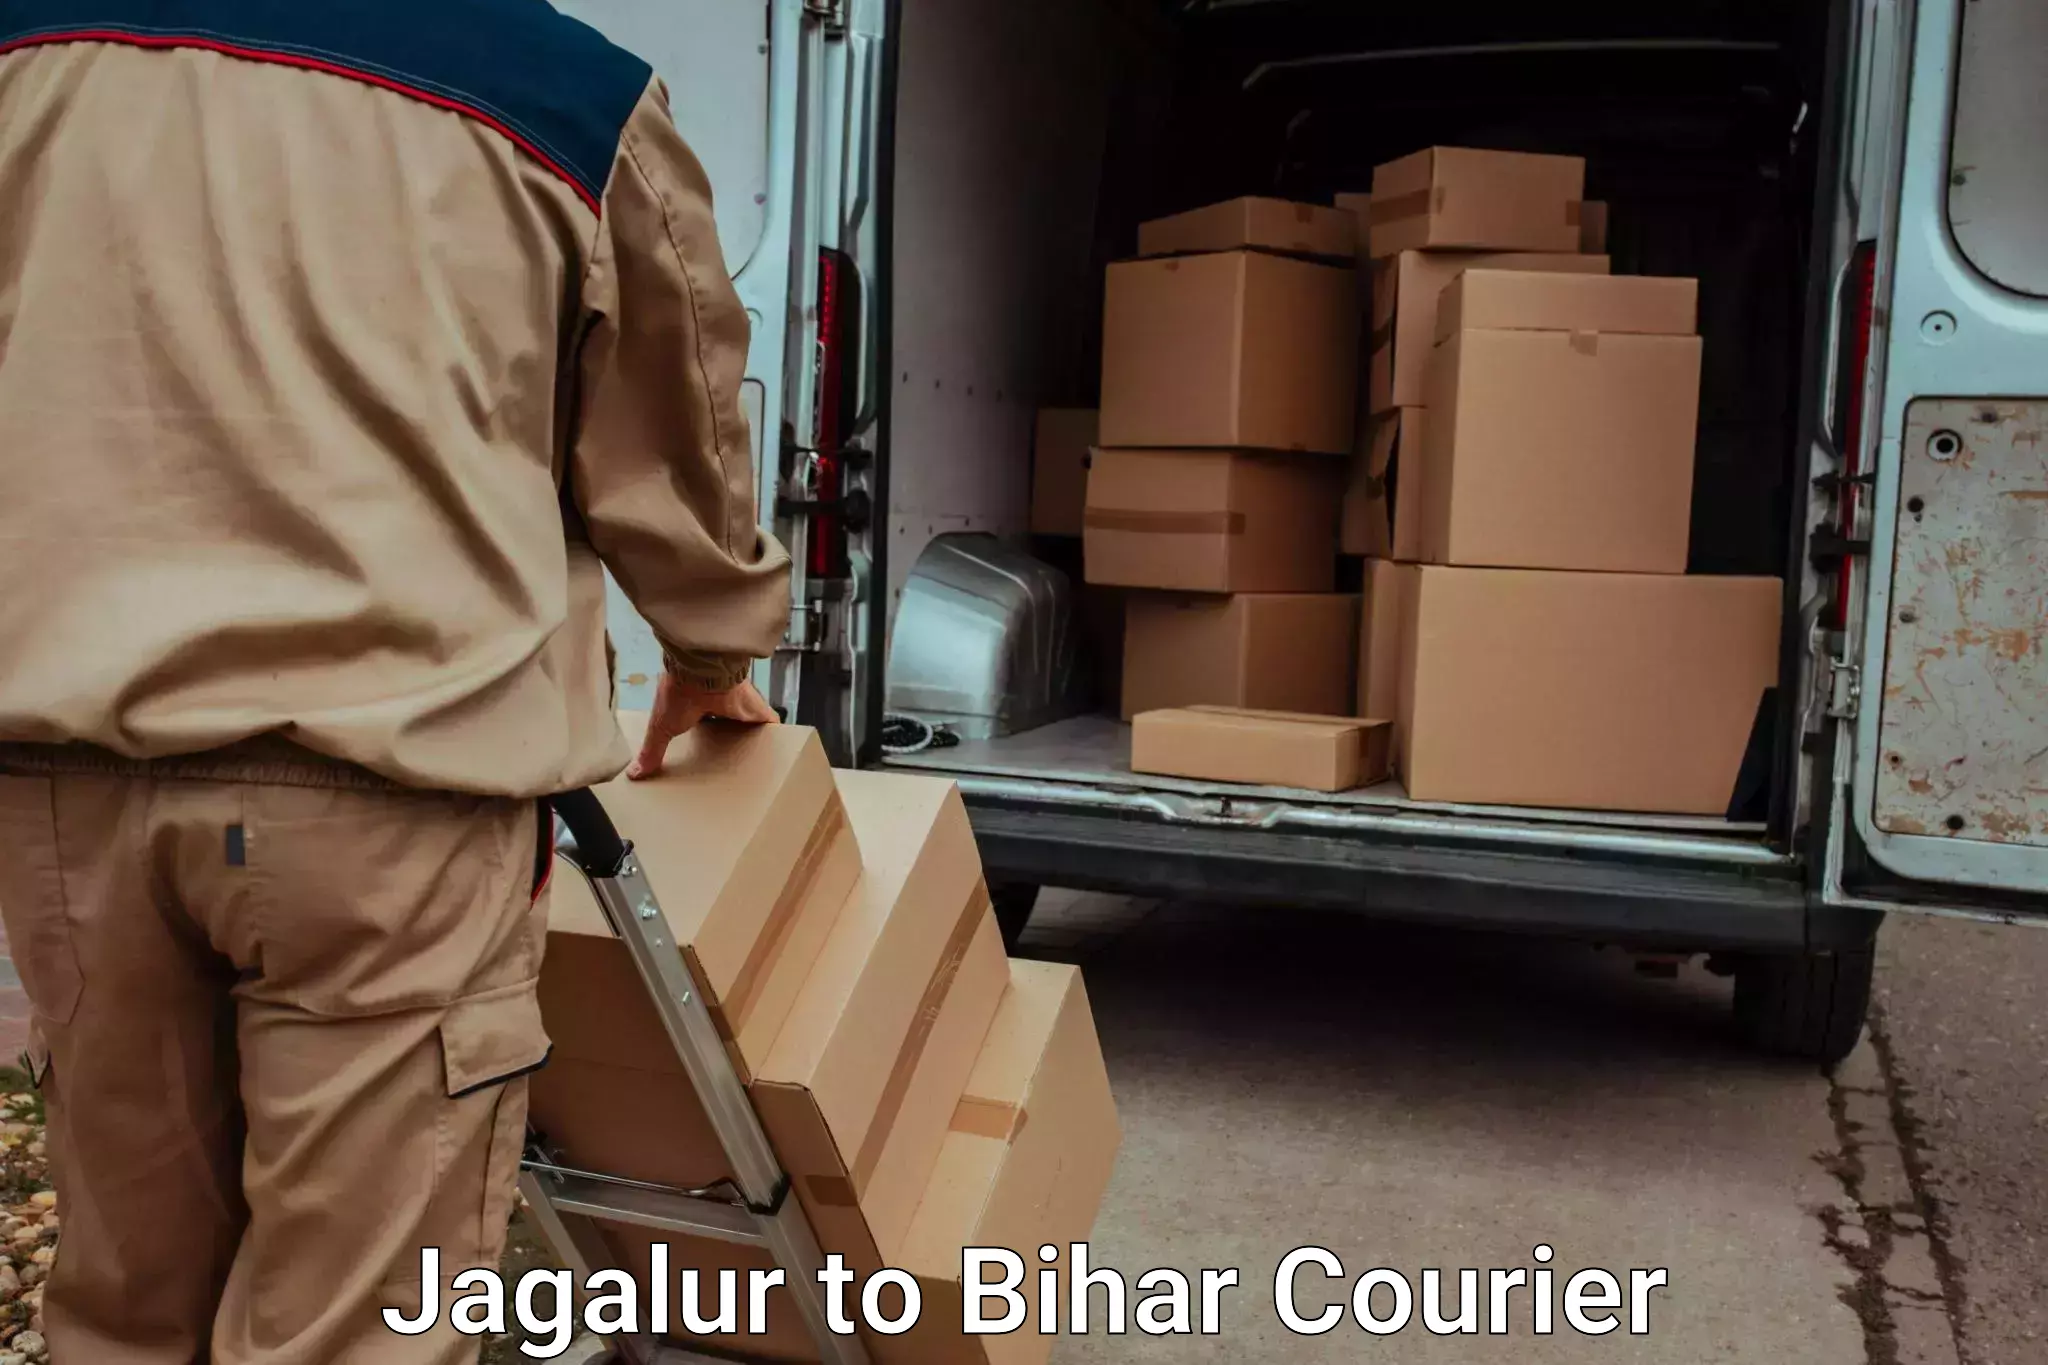 Baggage transport services Jagalur to Bhojpur